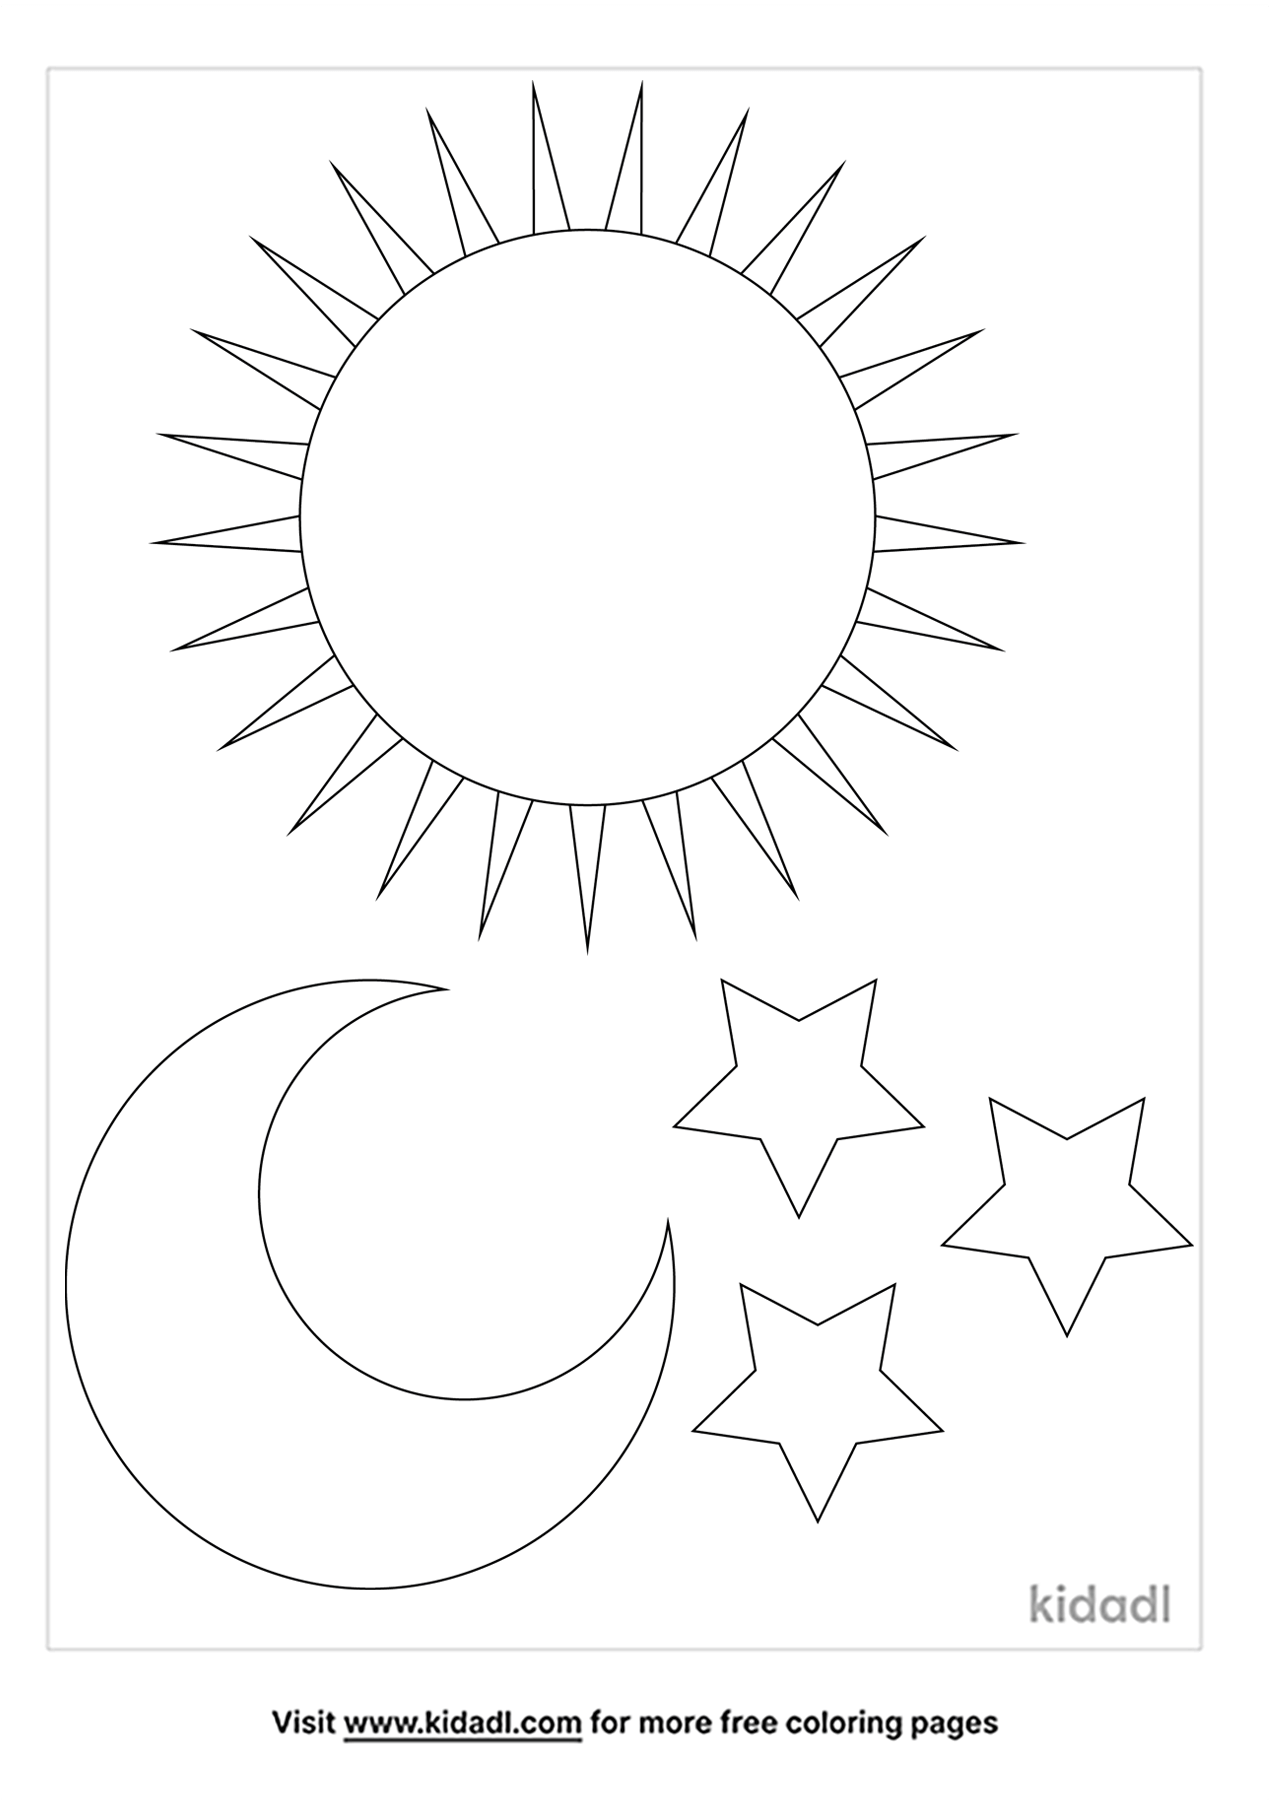 free printable sun and moon coloring pages